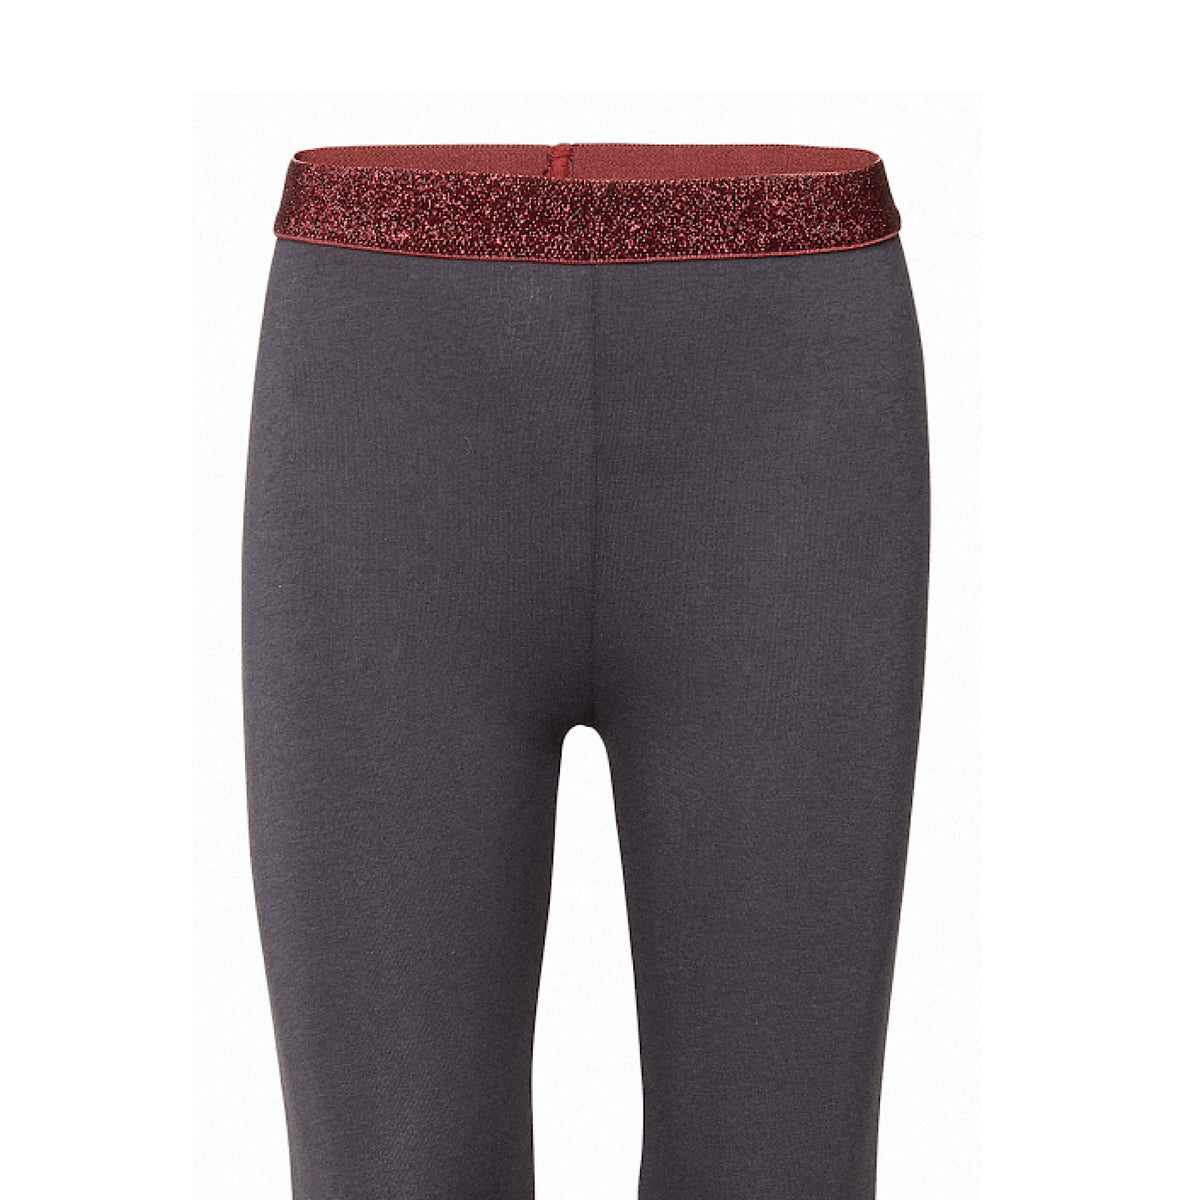 Charcoal Leggings with Red Glitter Band